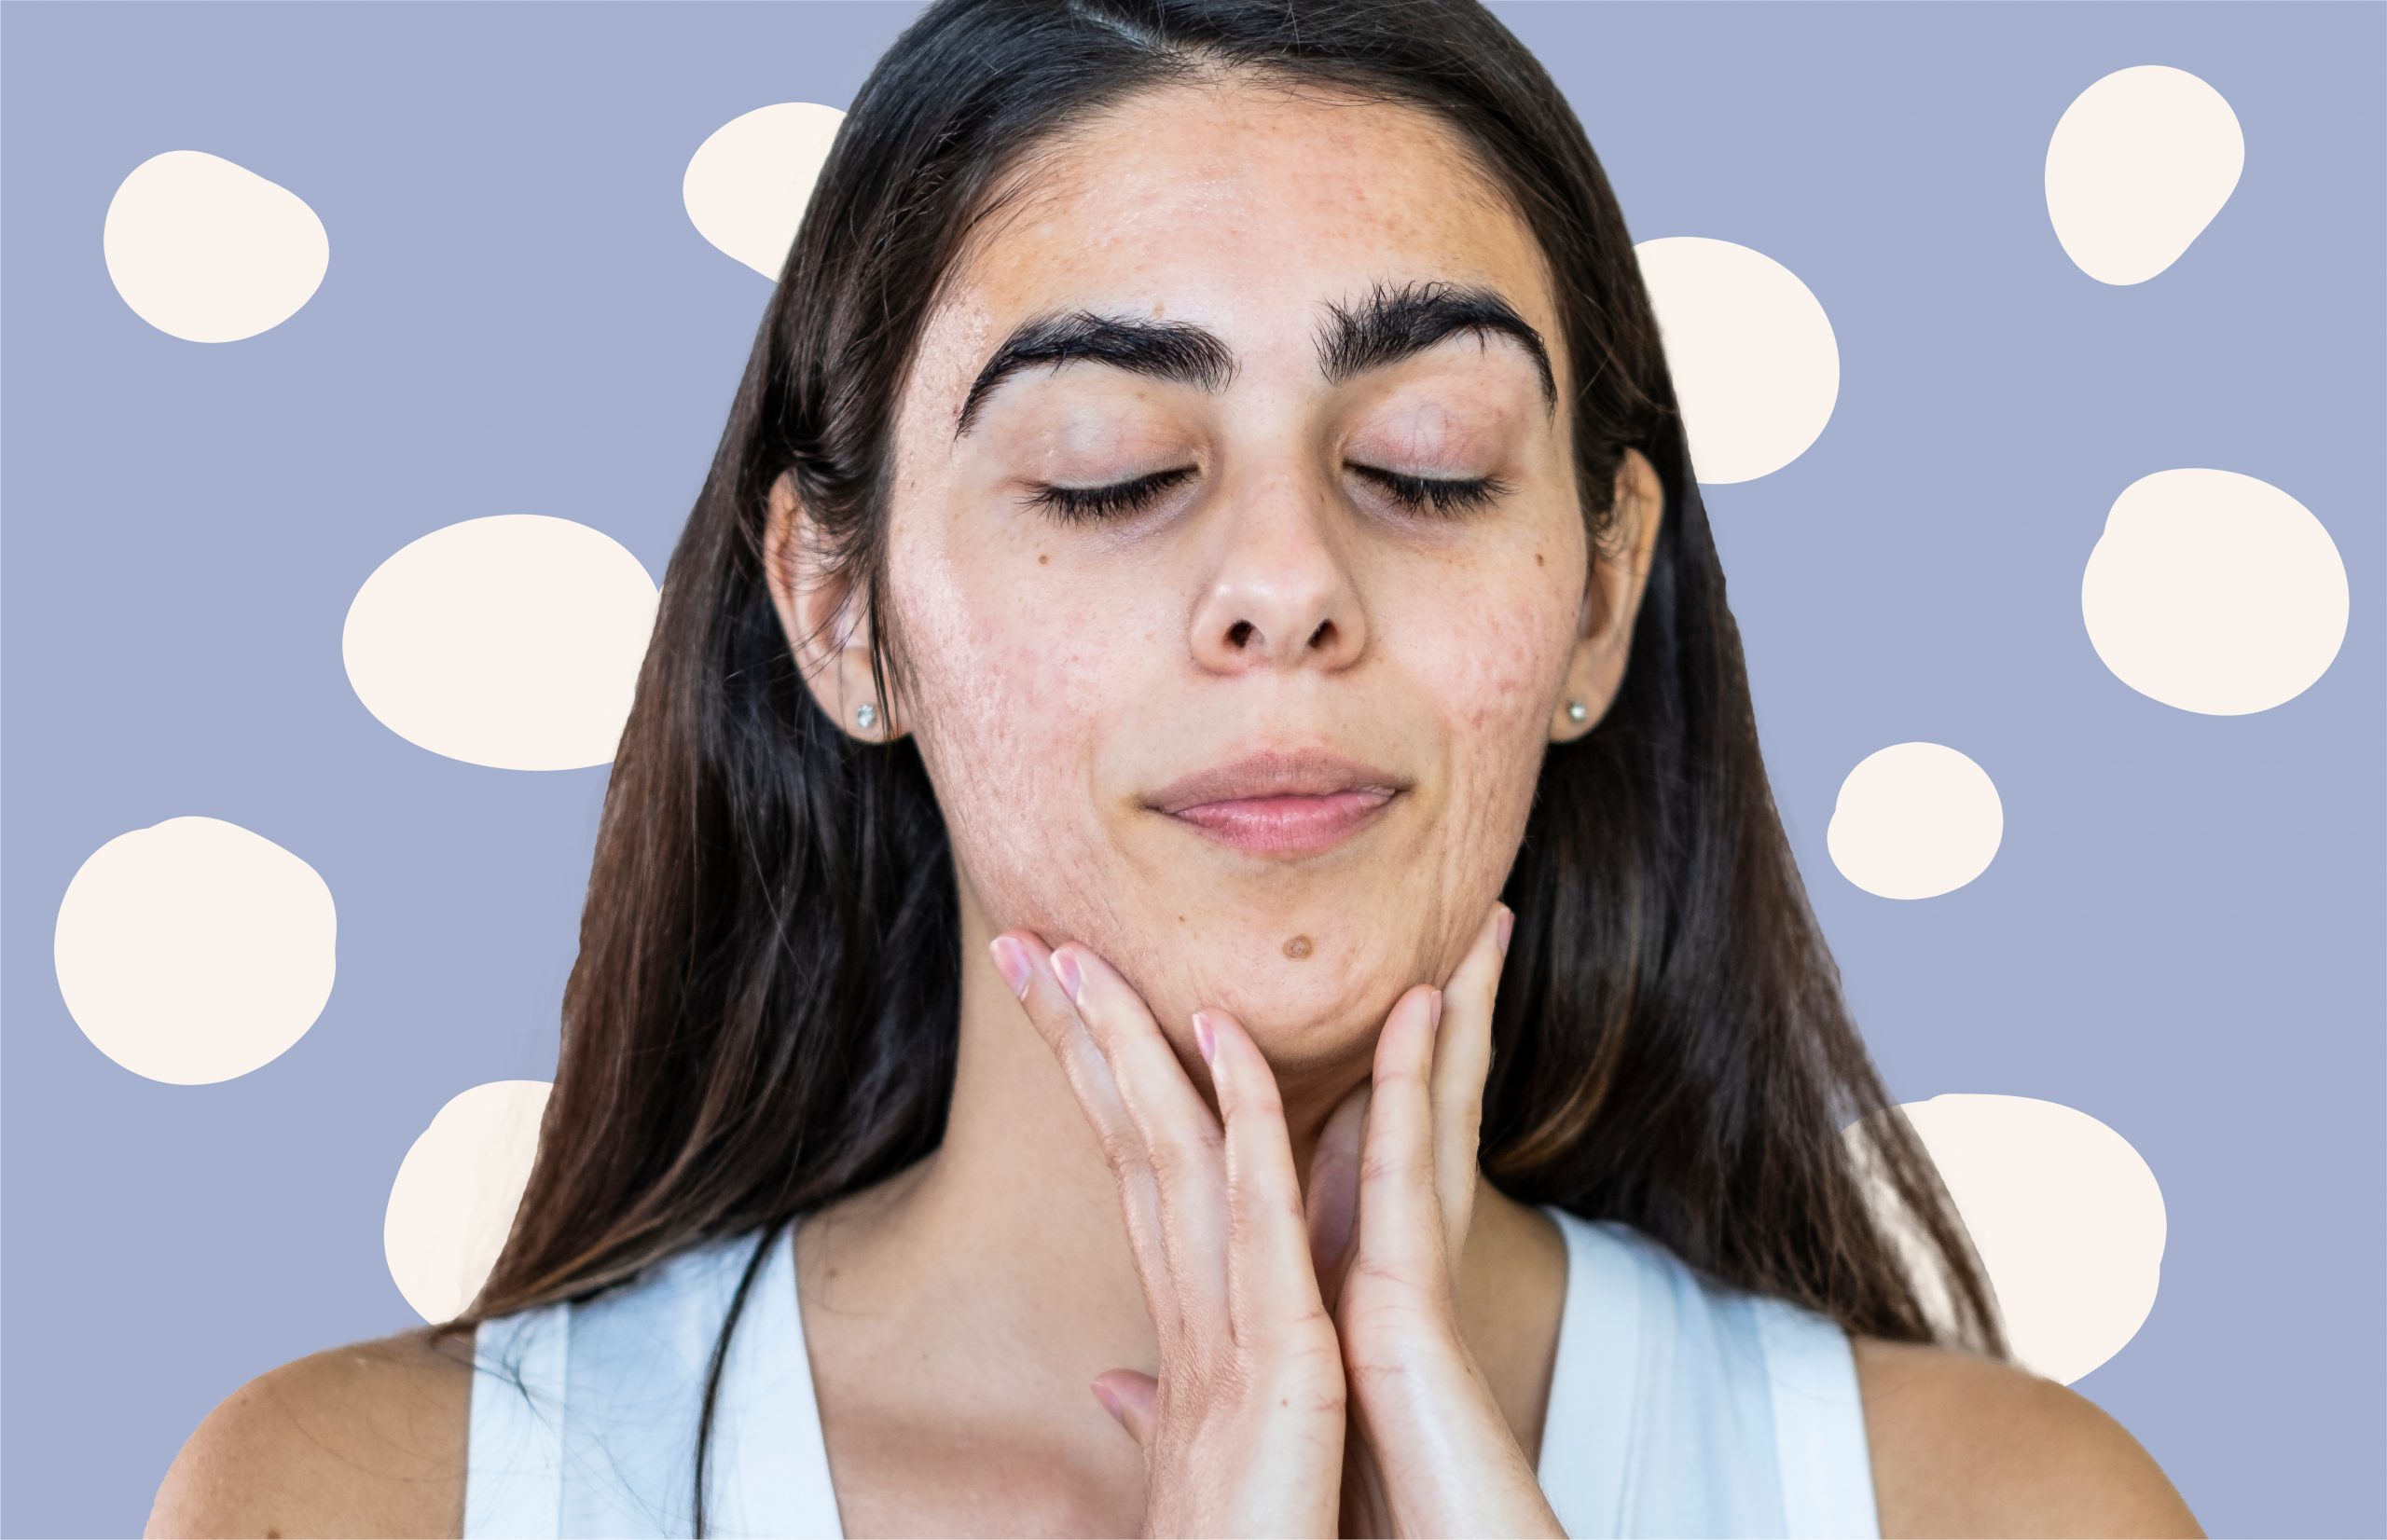 Prevent Chin & Jawline Breakouts With These 8 Expert-Approved Tips